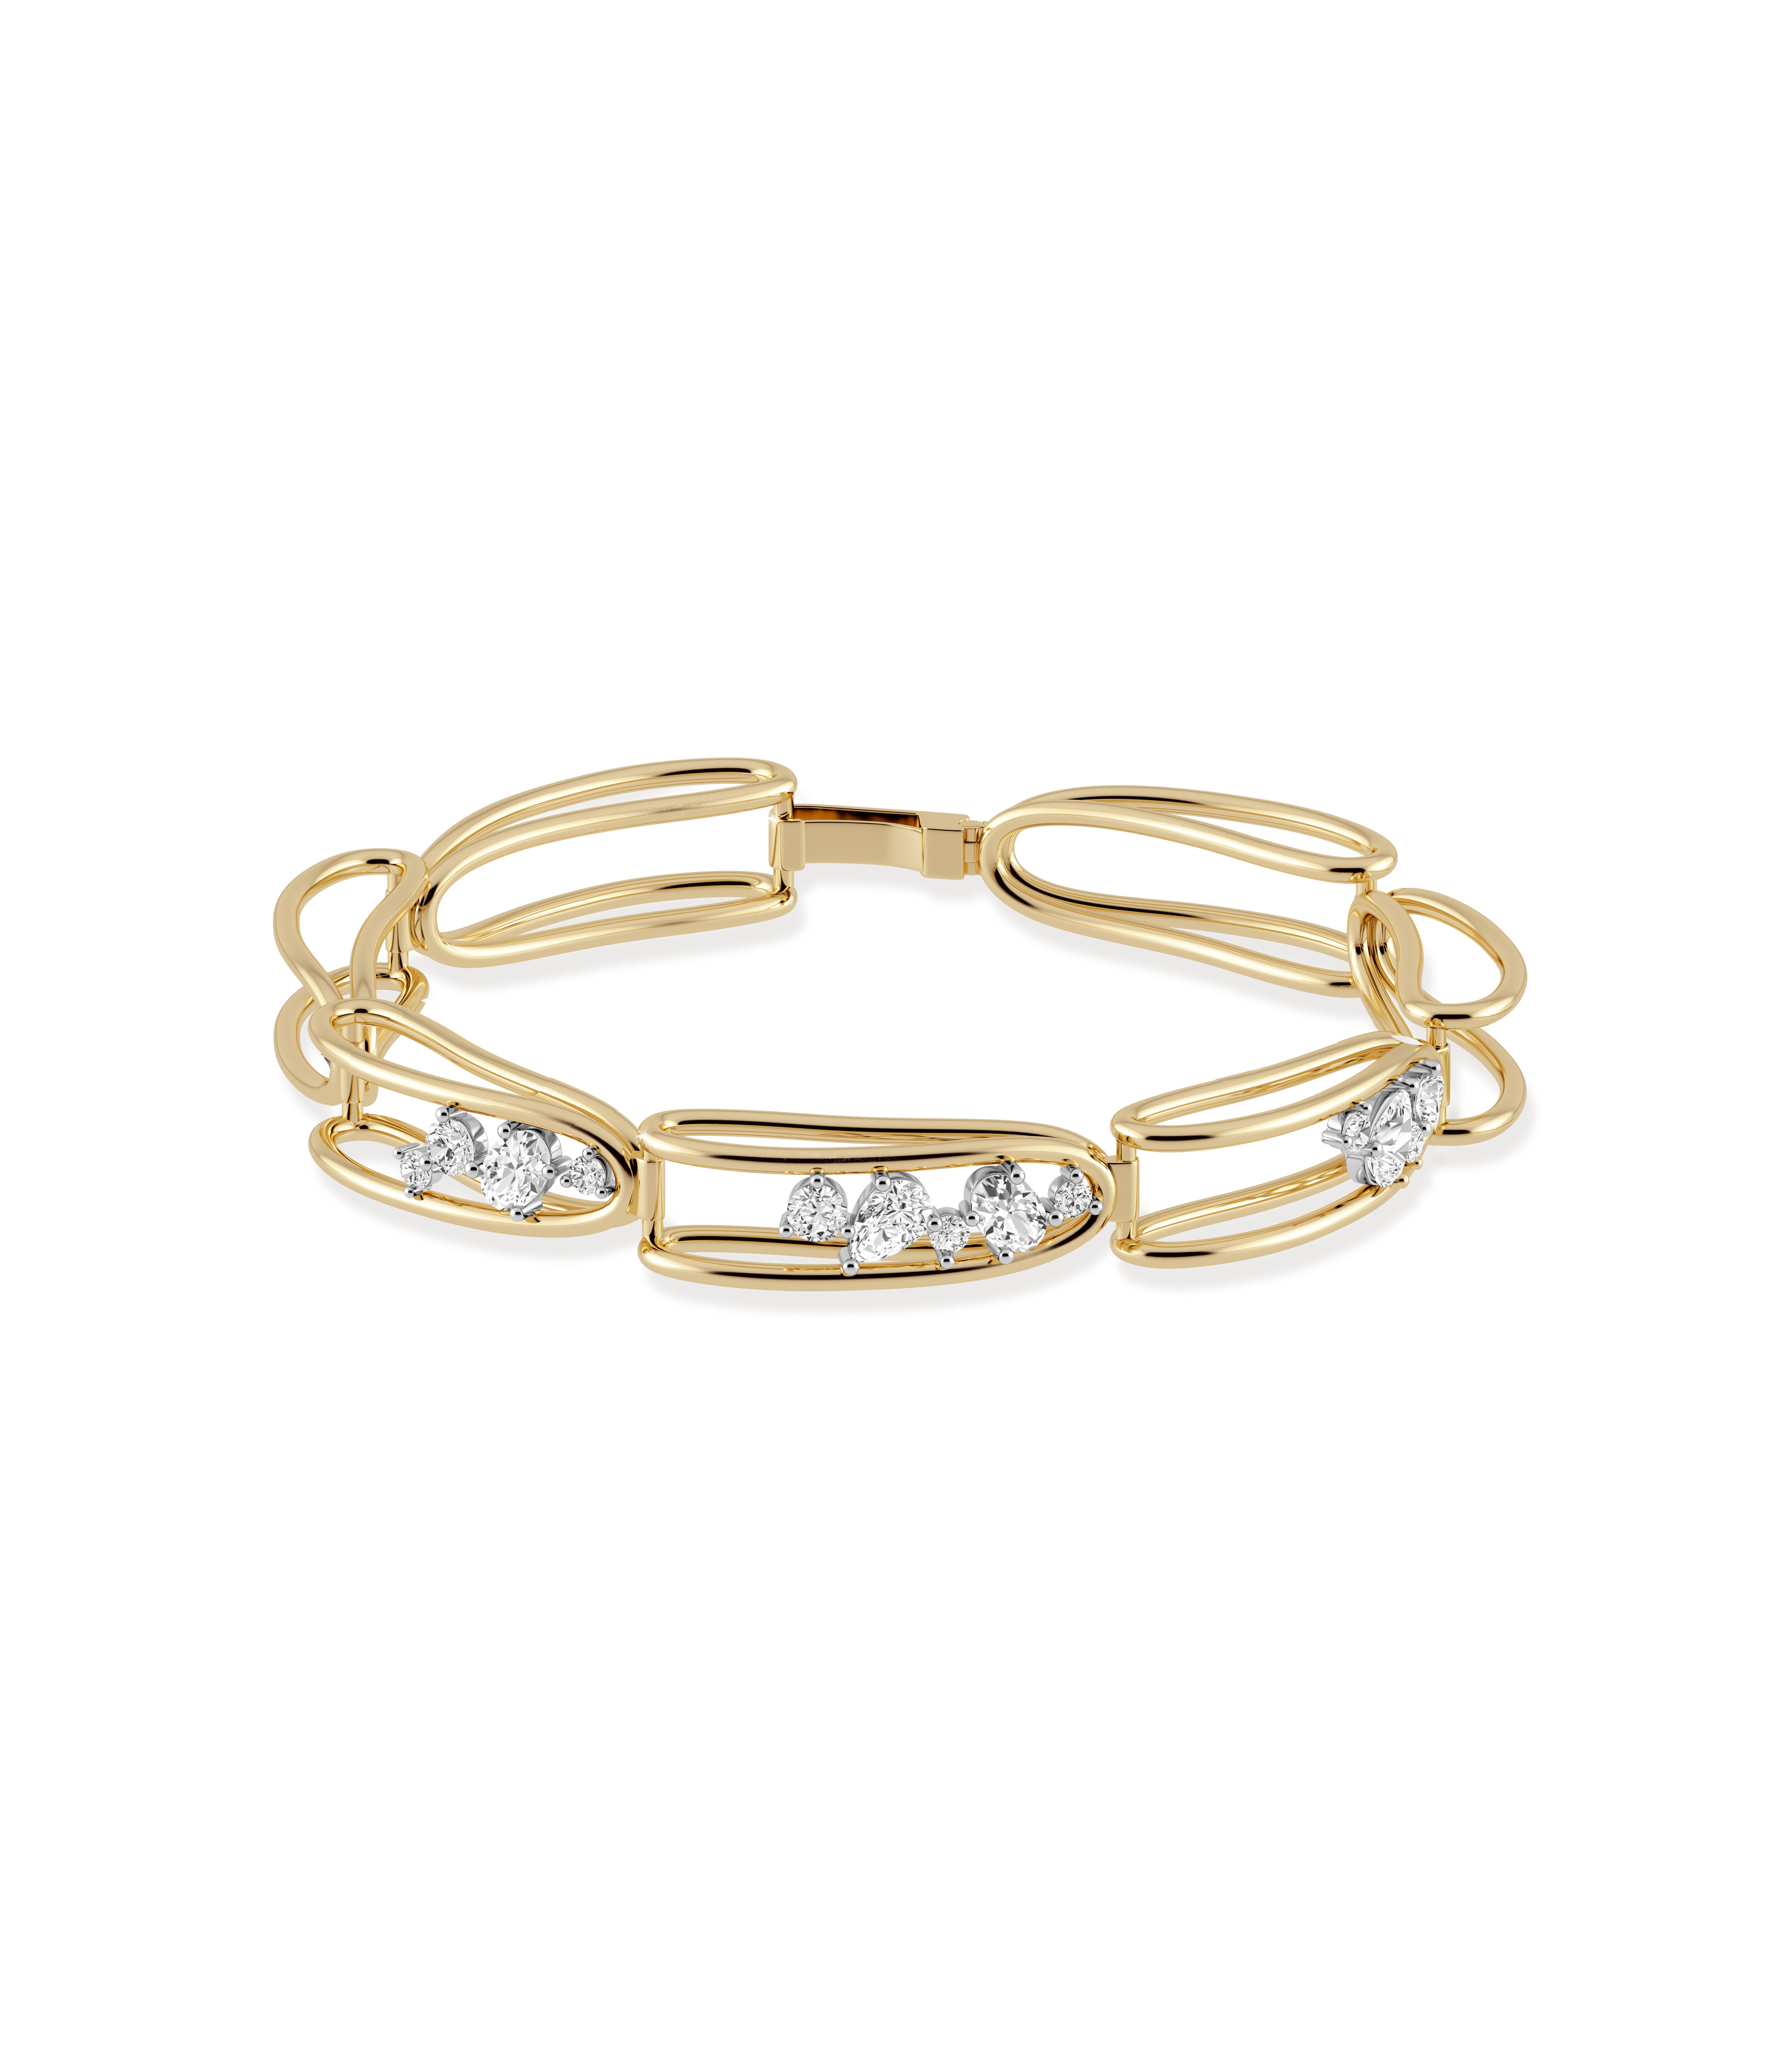 Our Mara Folded Links Bracelet is made in 18K gold with varying sized round, pear and oval shaped natural diamonds set in platinum. Featuring three asymmetrical diamond filled links.

The Mara Collection was built around the beauty of negative space